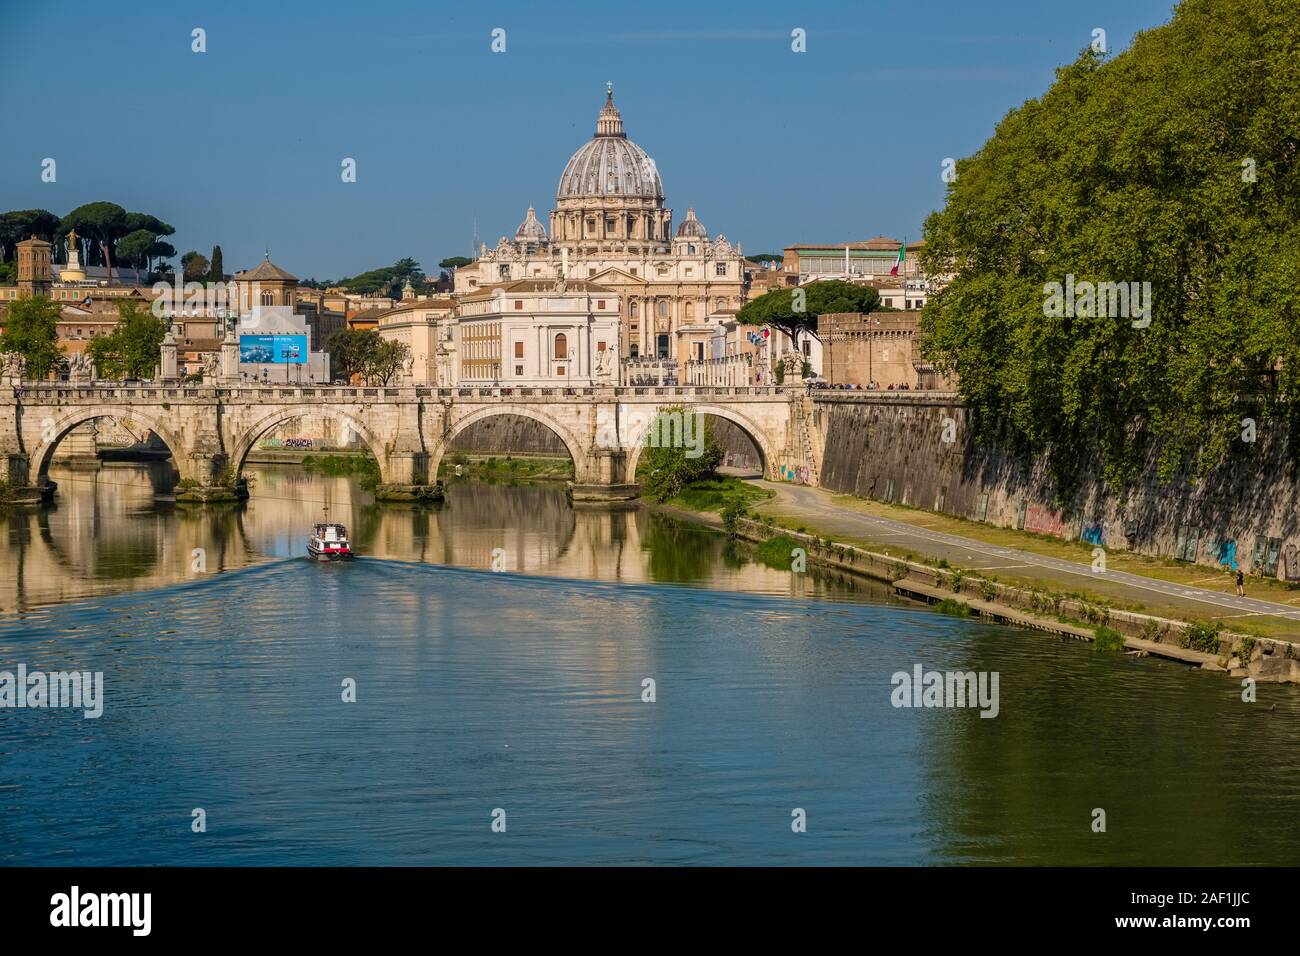 The Papal Basilica of St. Peter, St. Peter's Basilica and the bridge Ponte Sant'Angelo, seen across the river Tiber Stock Photo